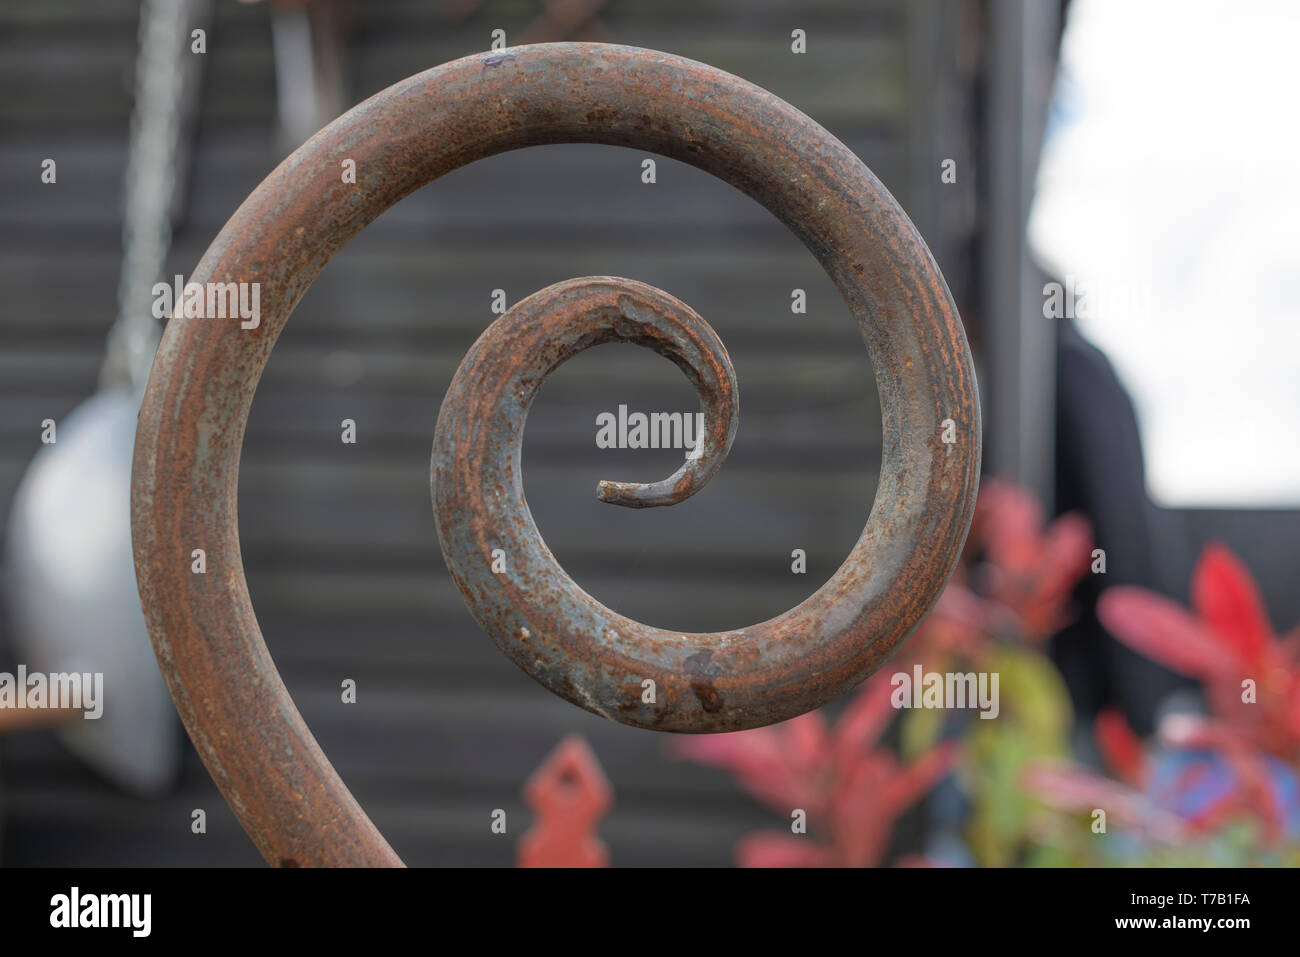 Wrought iron formed into an elegant spiral Stock Photo